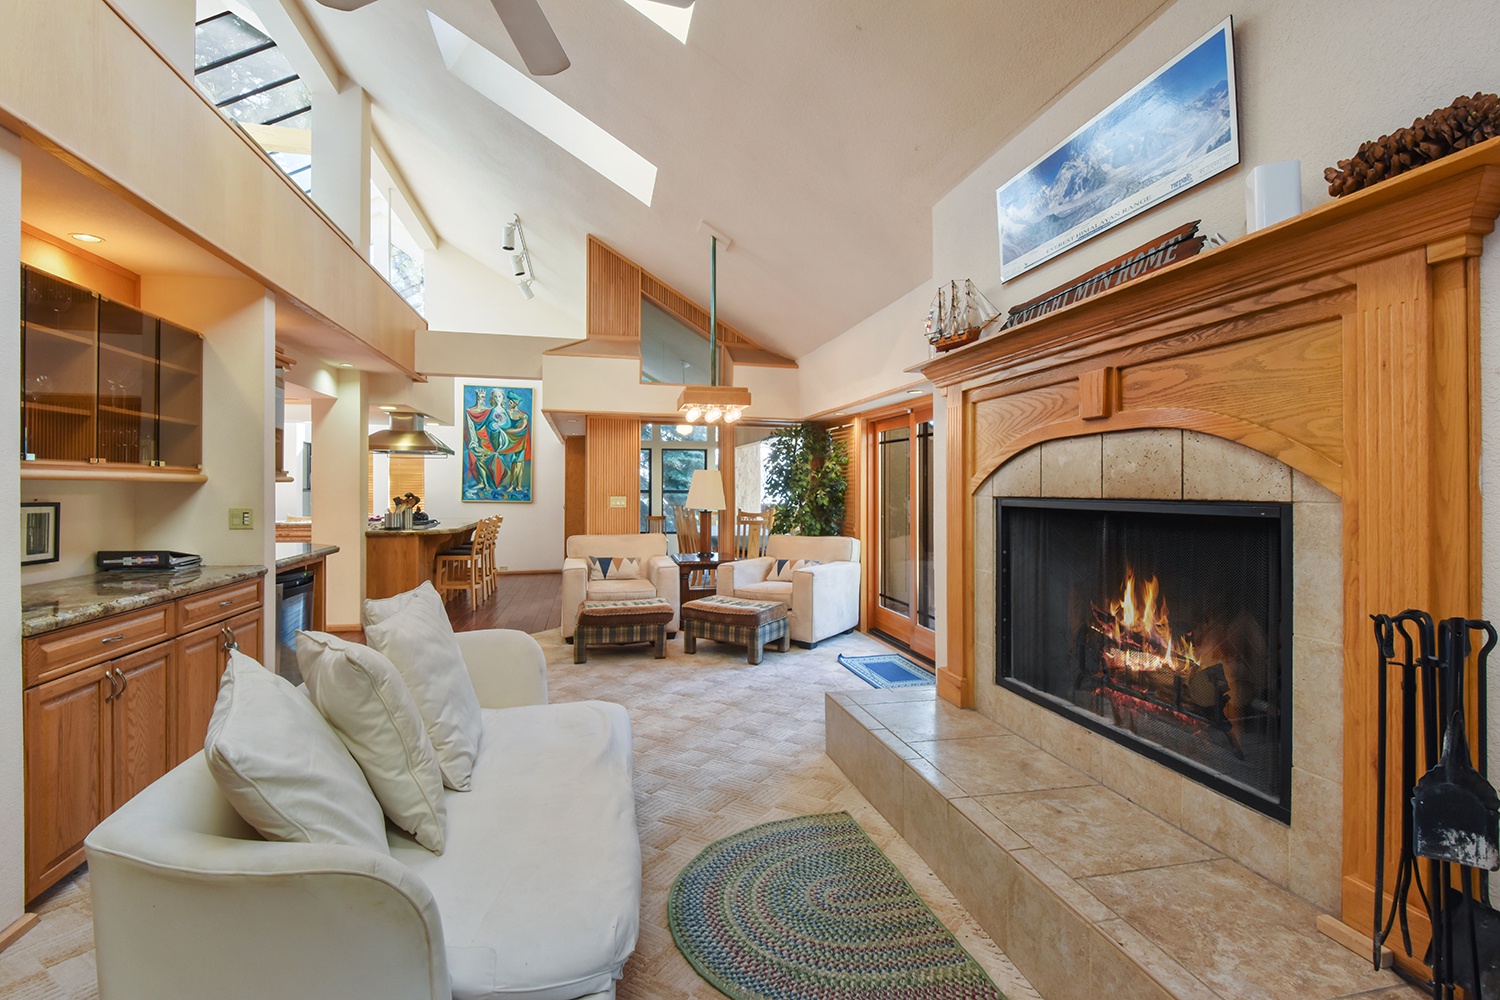 Open living space level 2 with fireplace, Smart TV, and deck